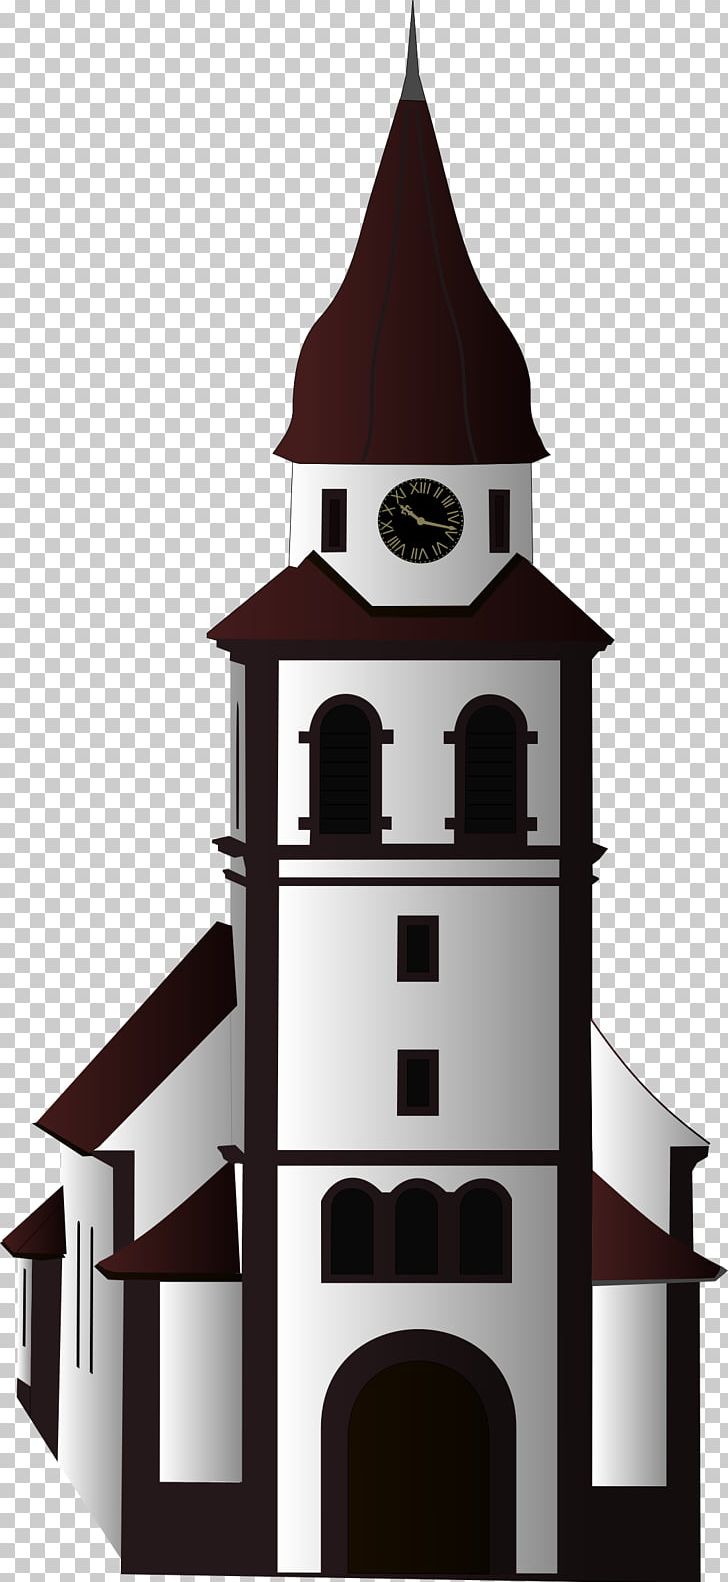 Christian Church Steeple PNG, Clipart, Animation, Bell Tower, Building, Chapel, Christian Church Free PNG Download